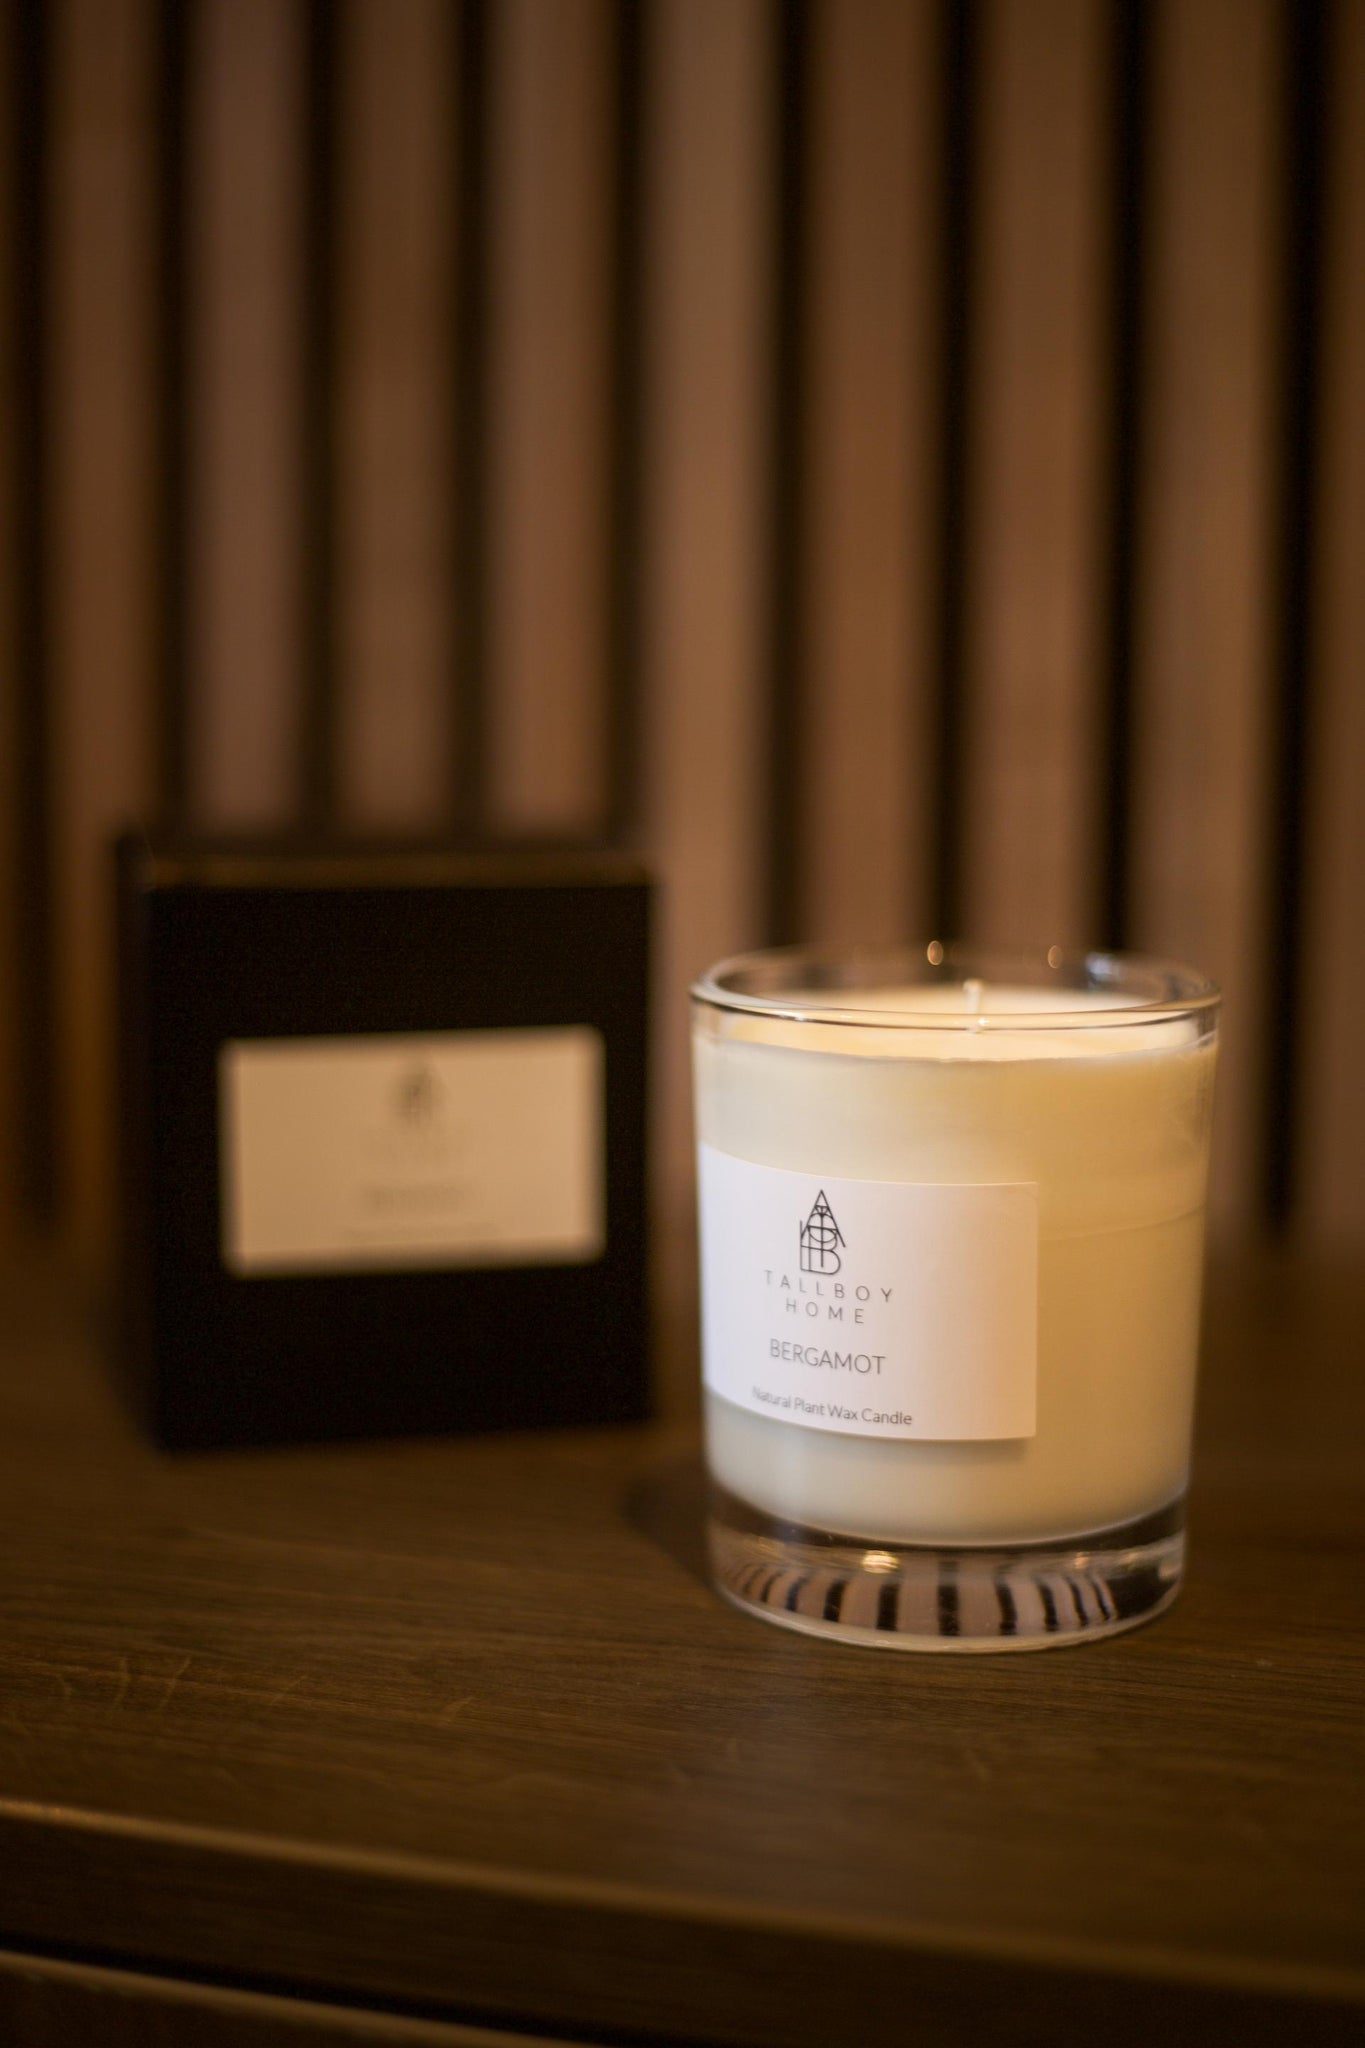 Natural Plant wax Scented candle - Bergamot